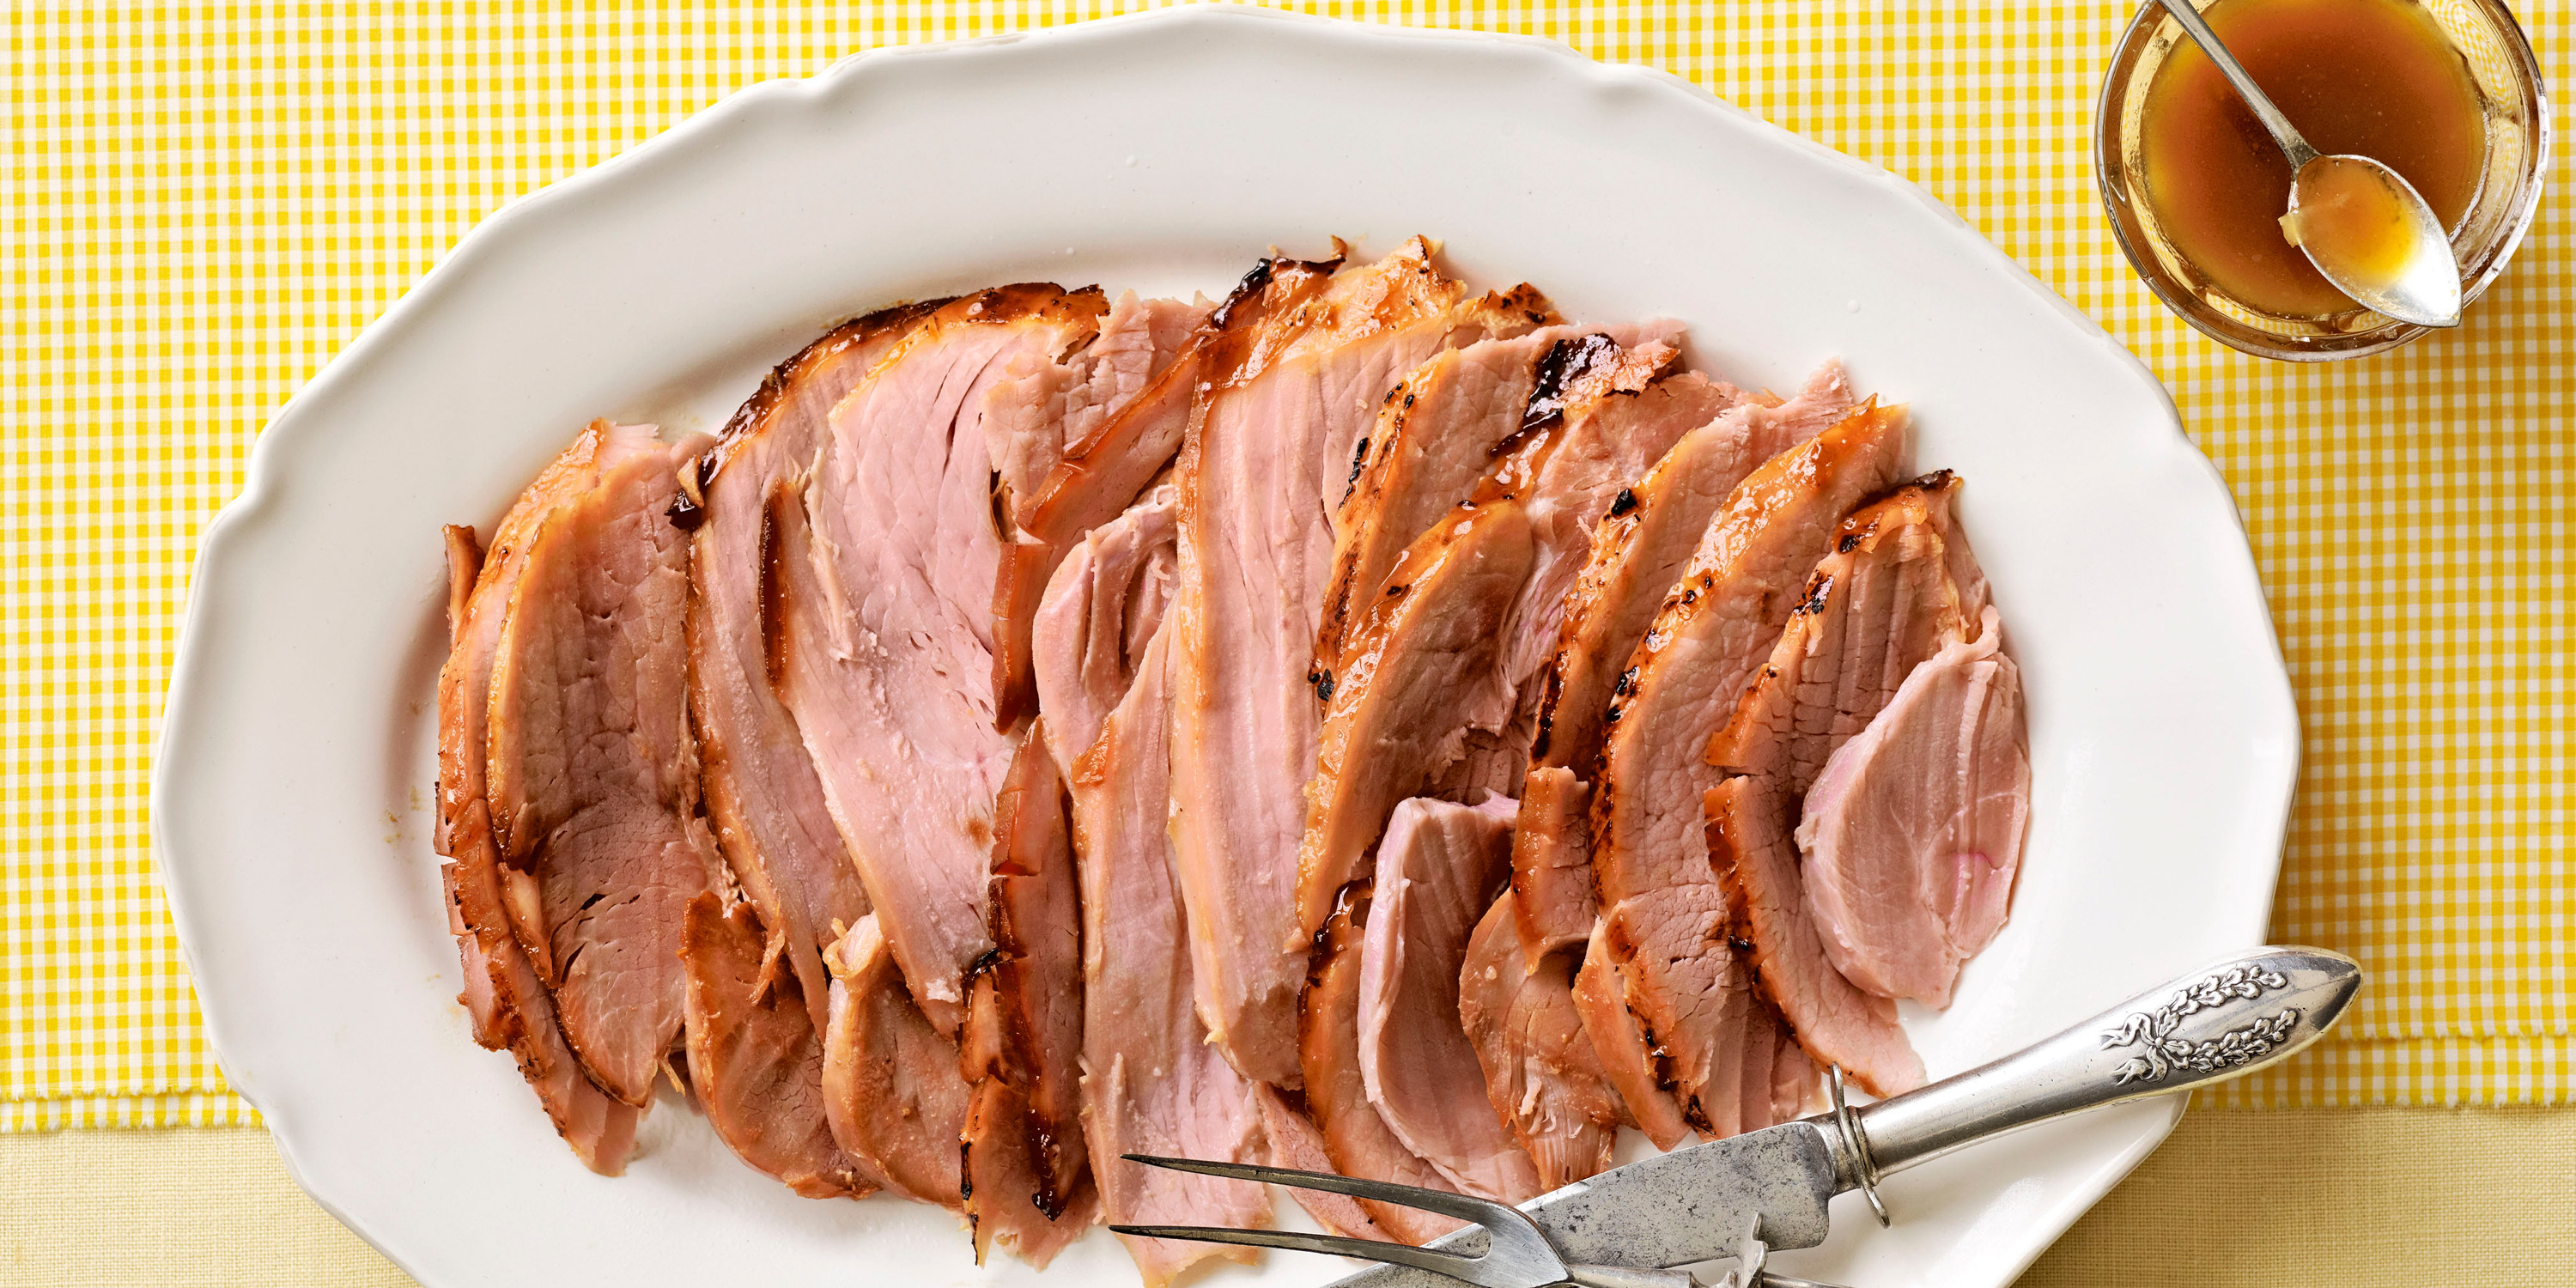 Easter Dinner Without Ham
 11 Best Easter Ham Recipes How to Make an Easter Ham